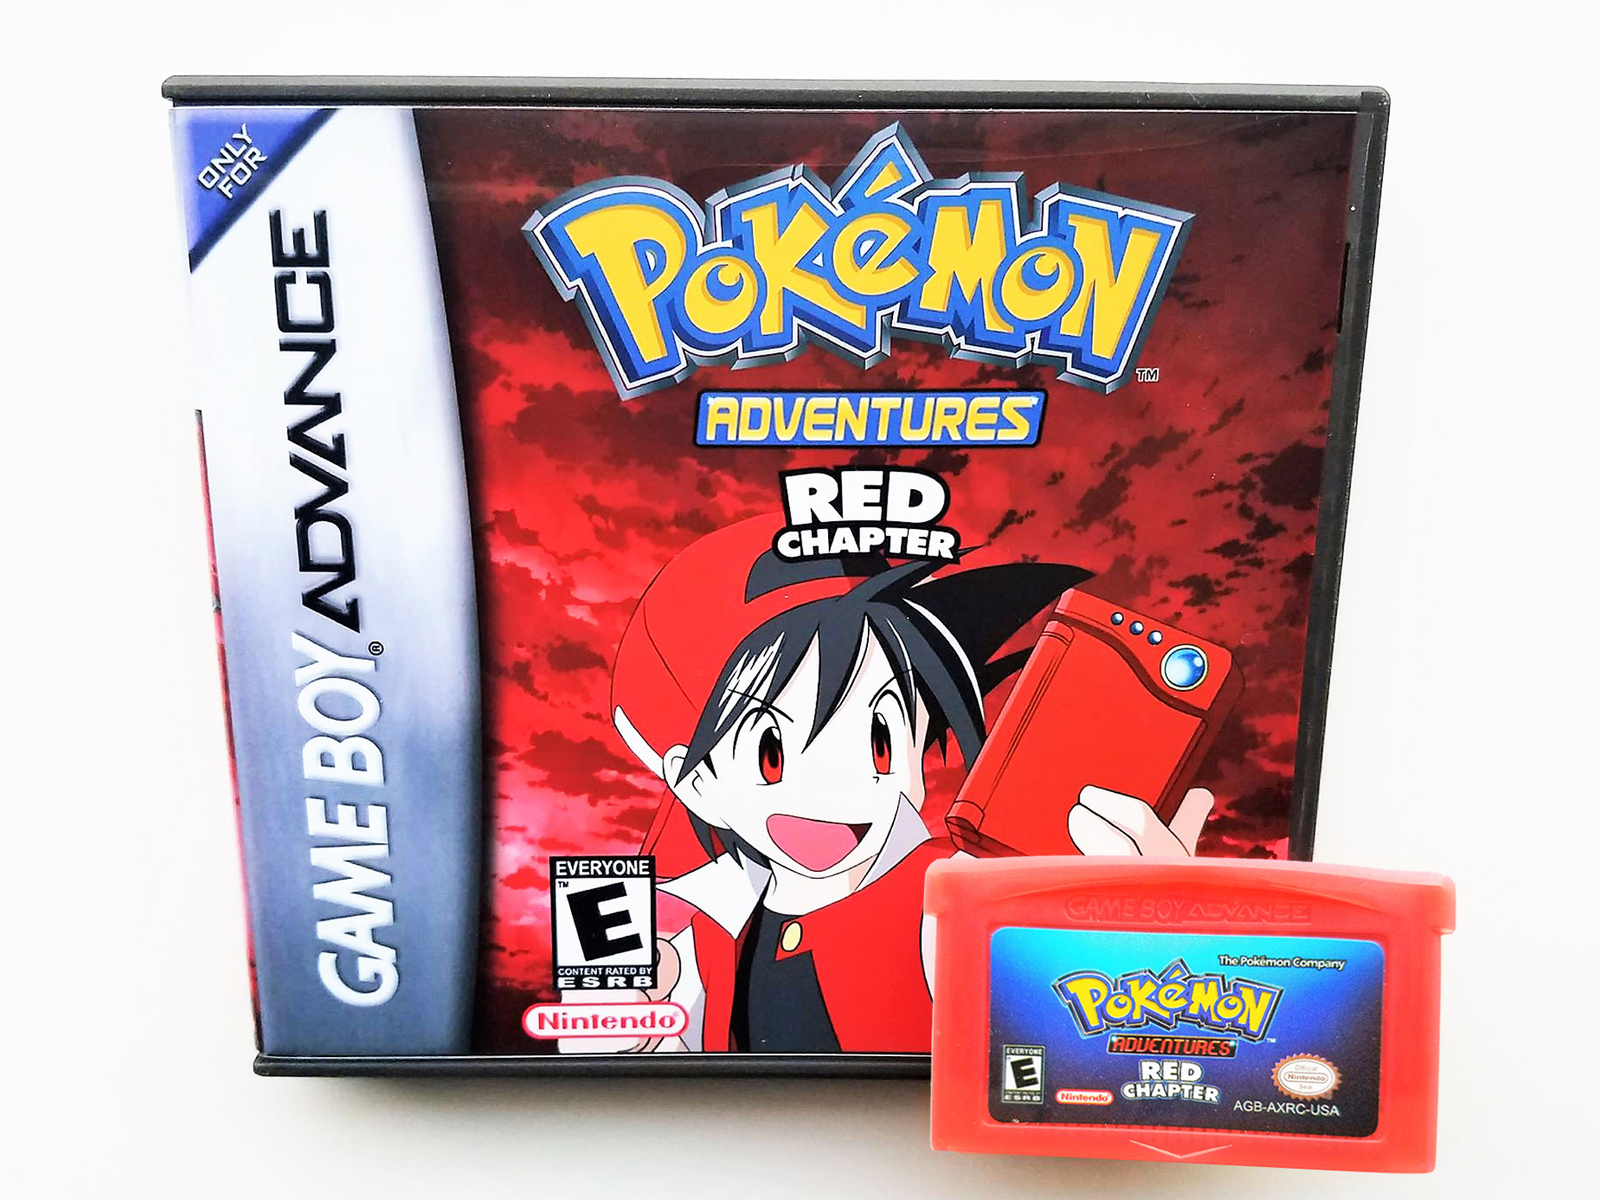 Pokemon Adventures Red Chapter Game / Case - Gameboy Advance (GBA) USA Seller